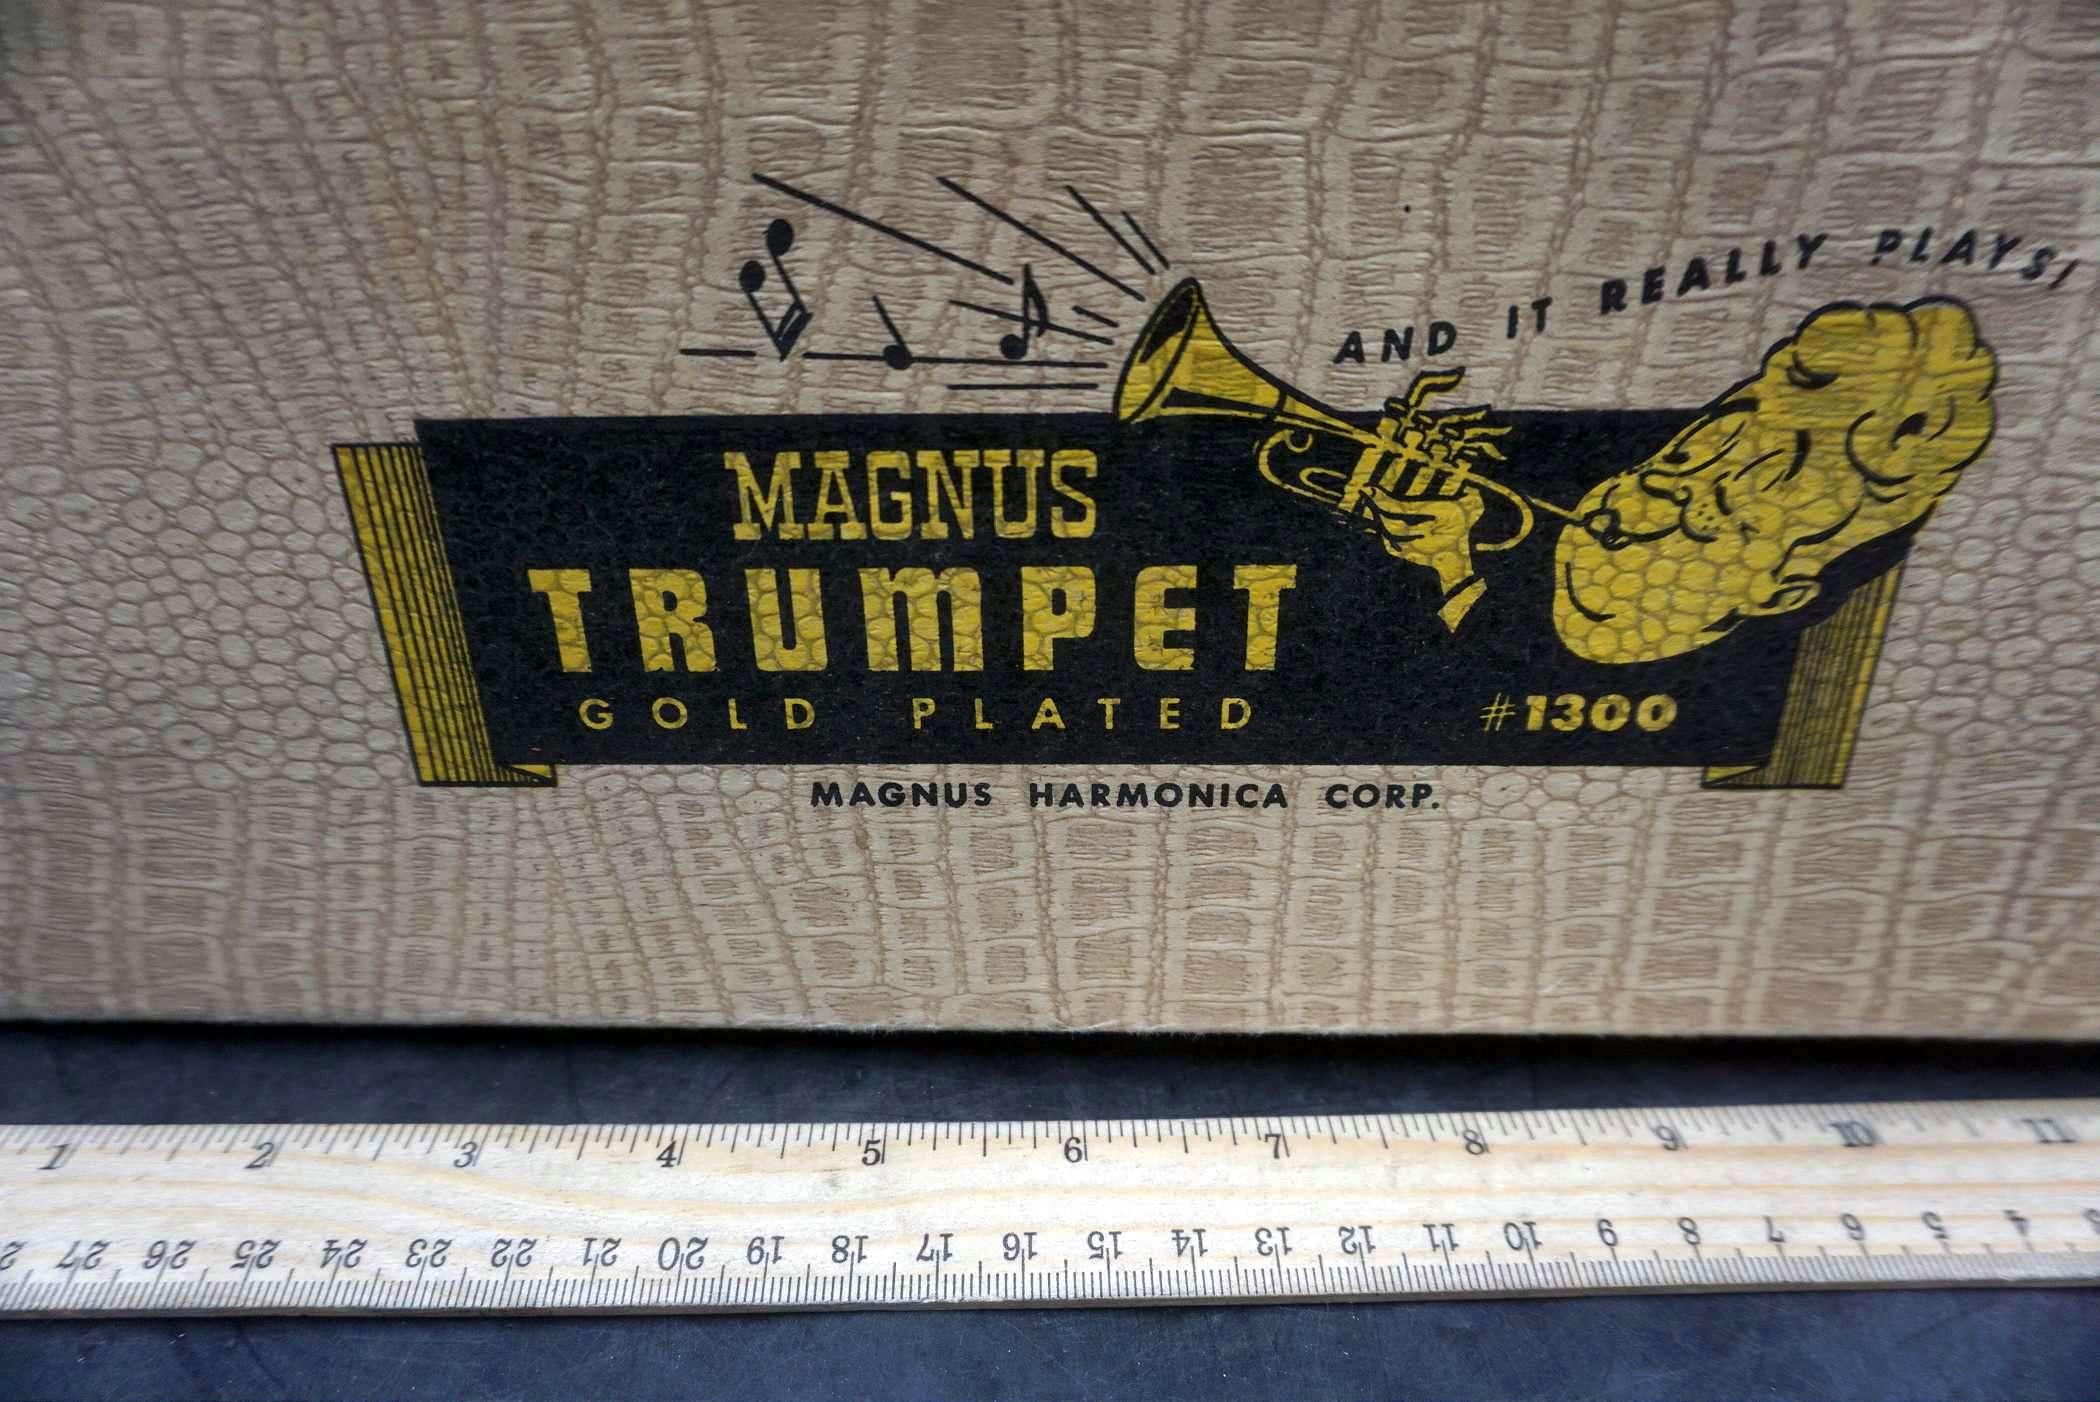 Magnus Toy Trumpet - Gold Plated